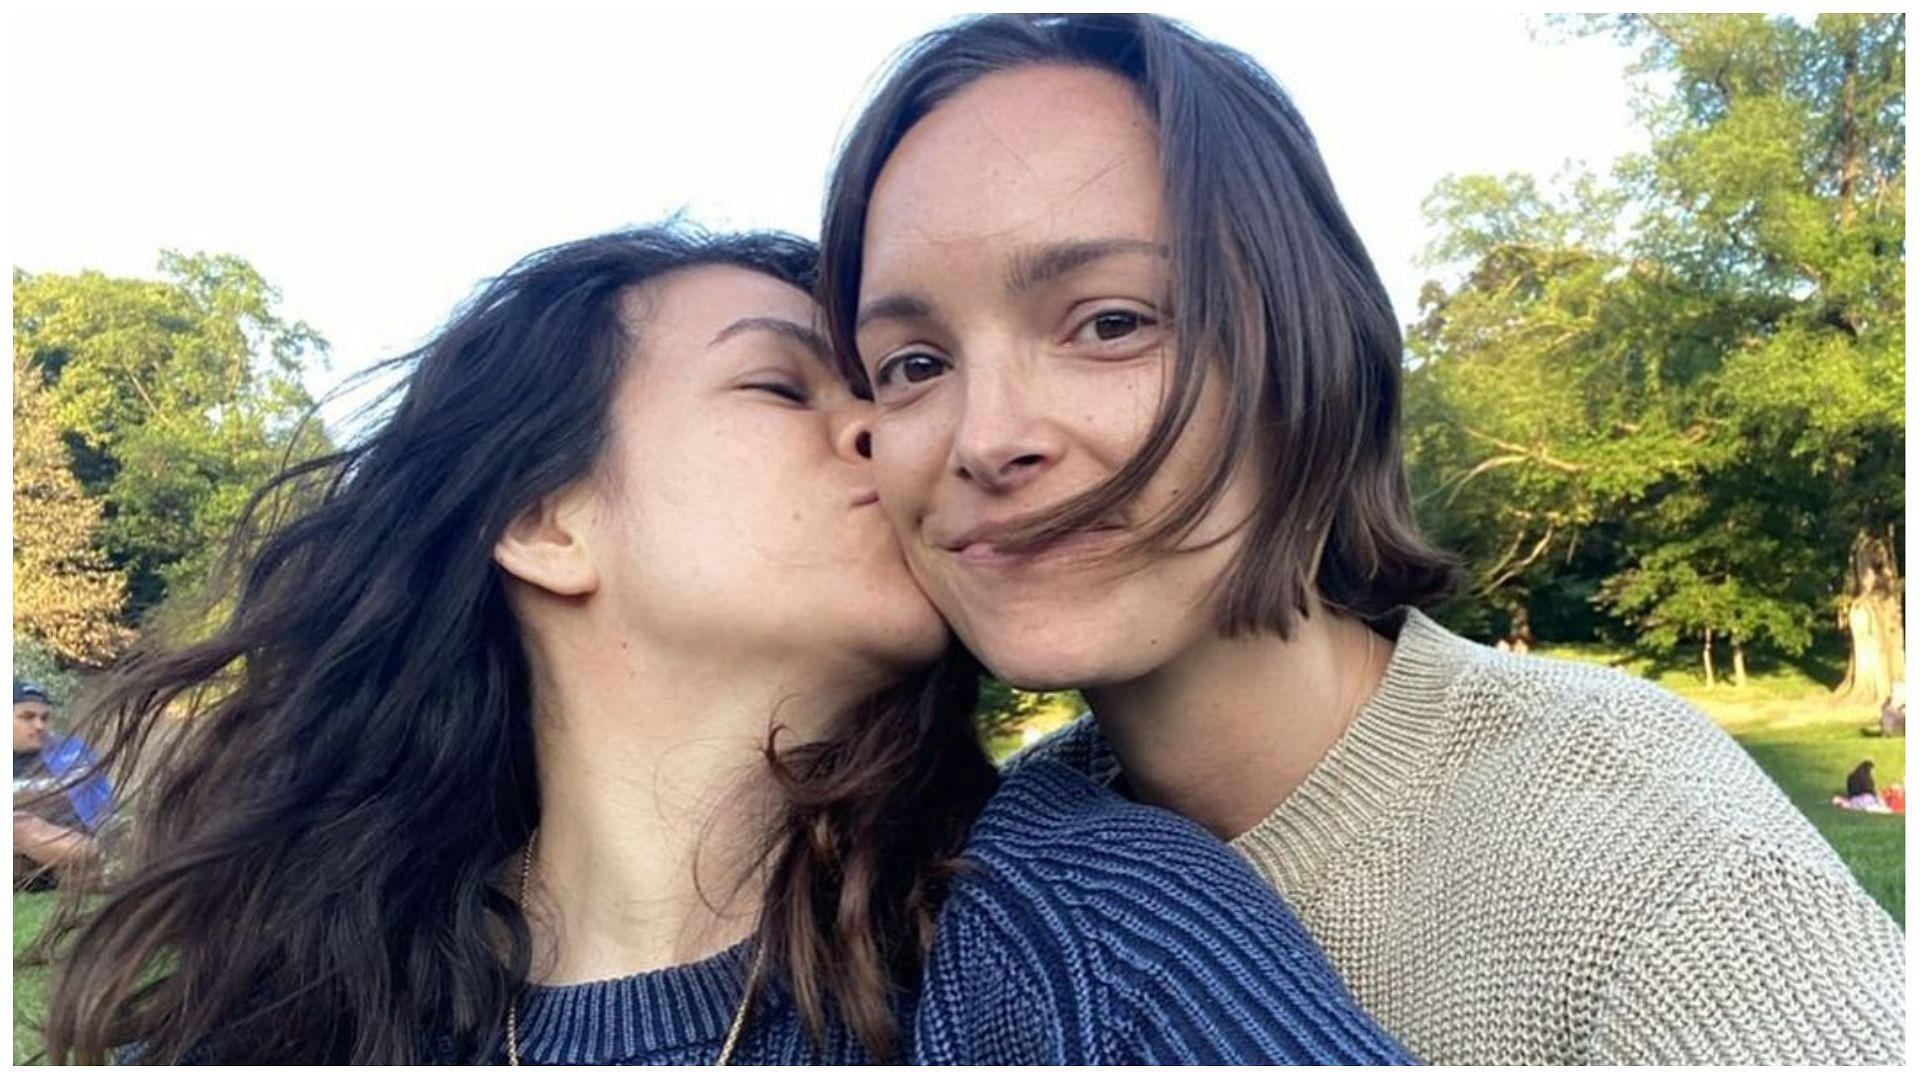 Abbi Jacobson and Jodi Balfour have been together since 2021 (Image via abbijacobson/Instagram)